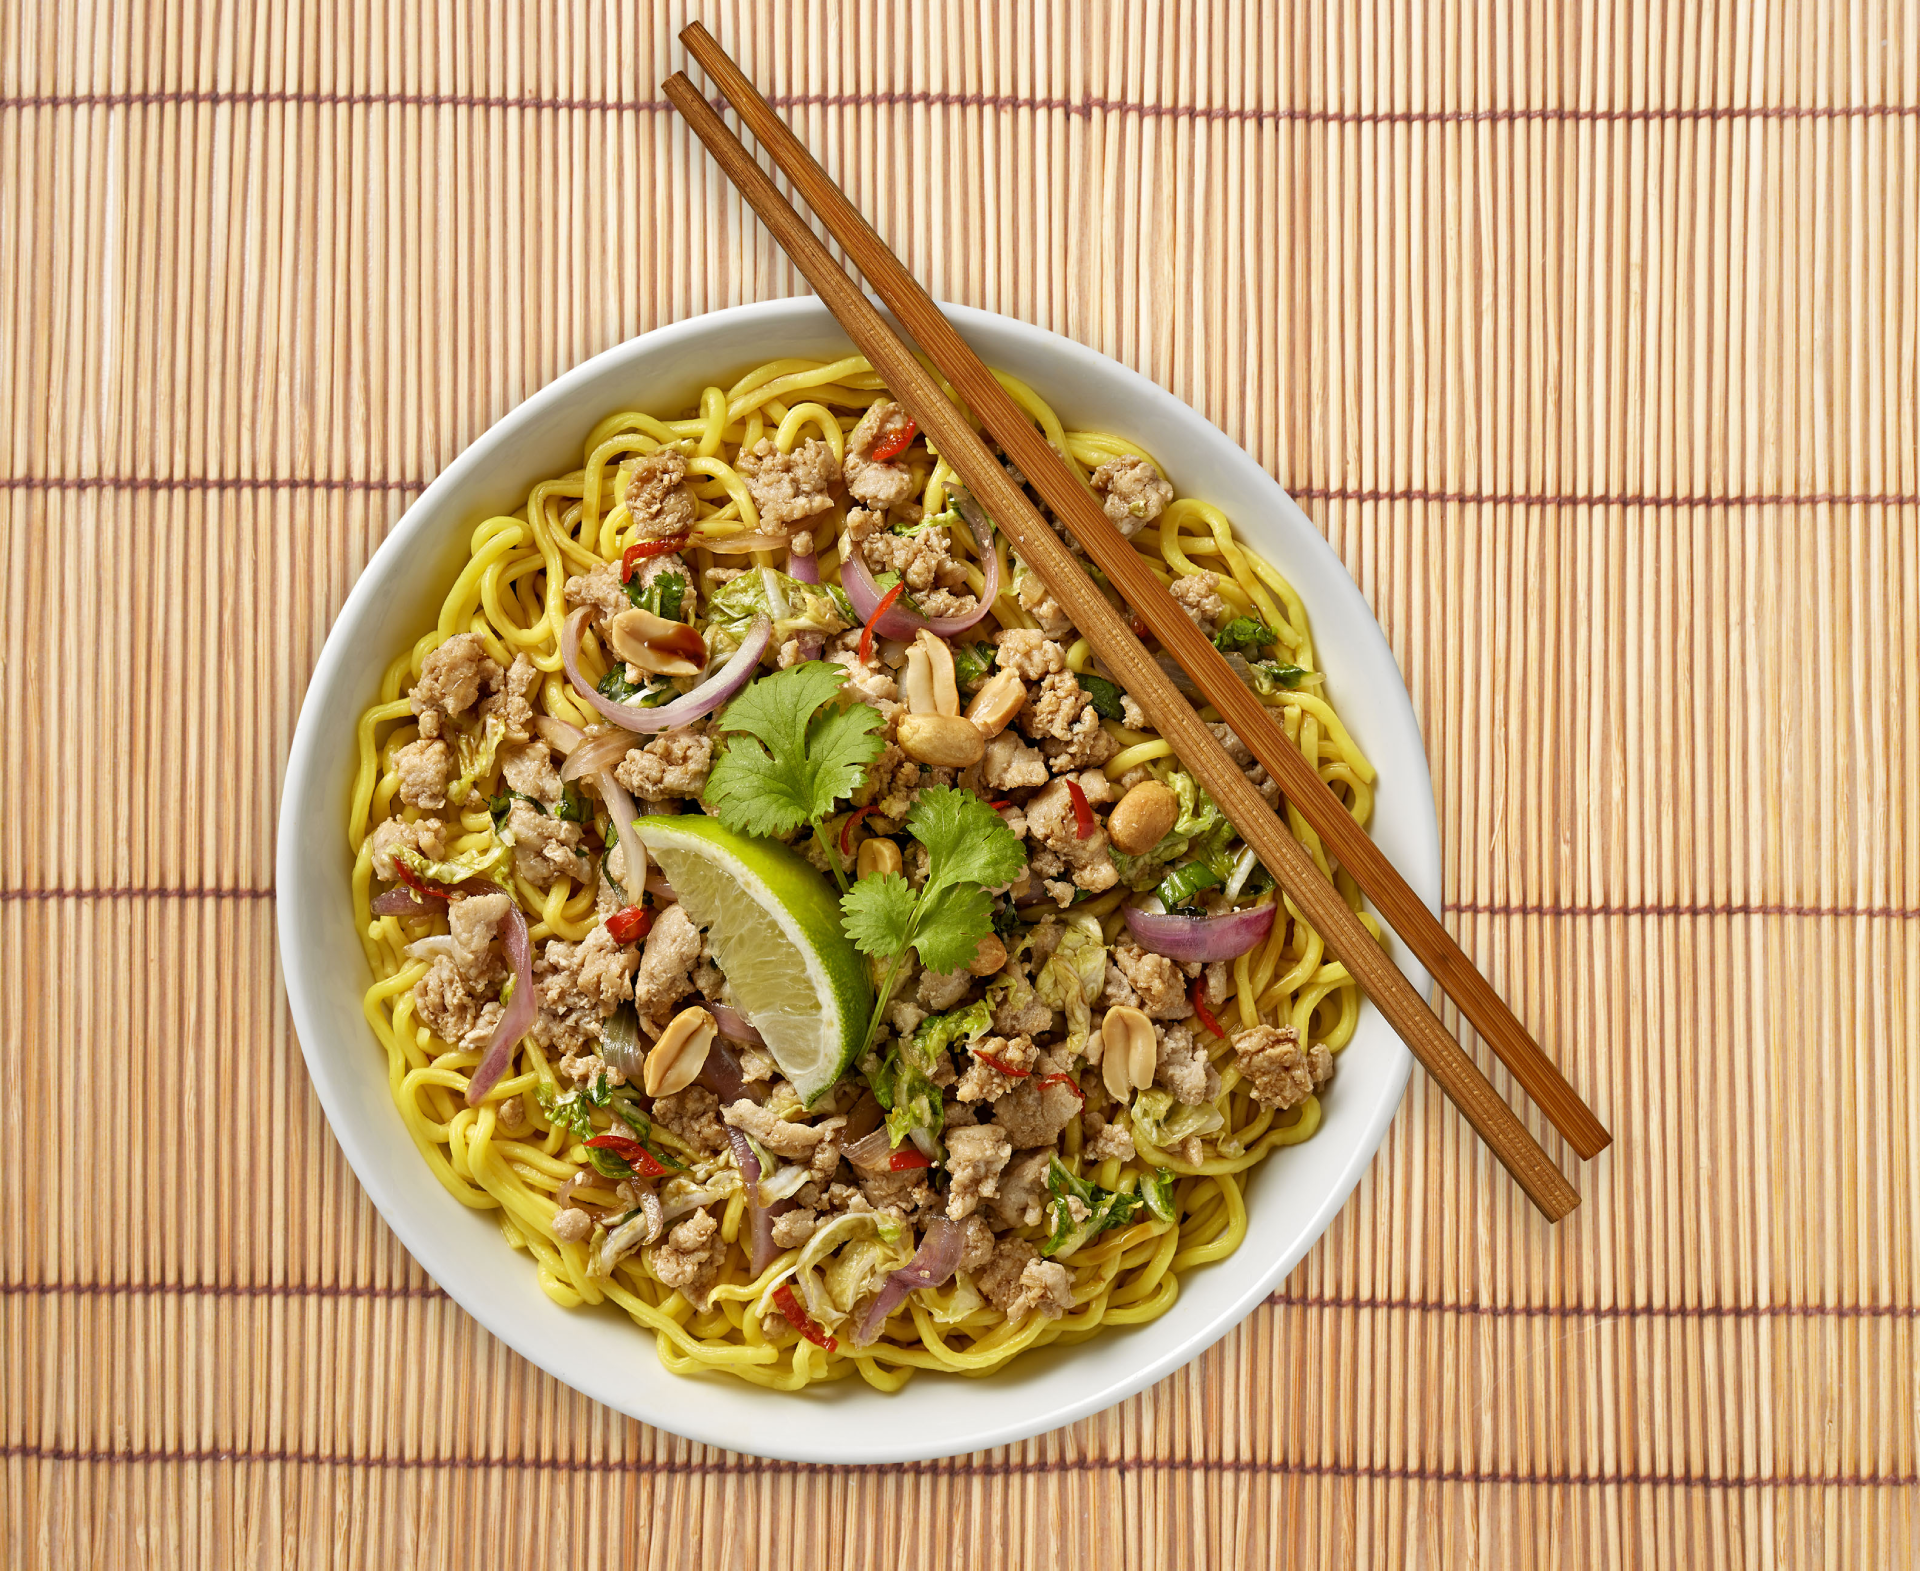 Wokka Noodles Recipes - Stir Fried Chicken with Chinese Cabbage and Thin Egg Noodles